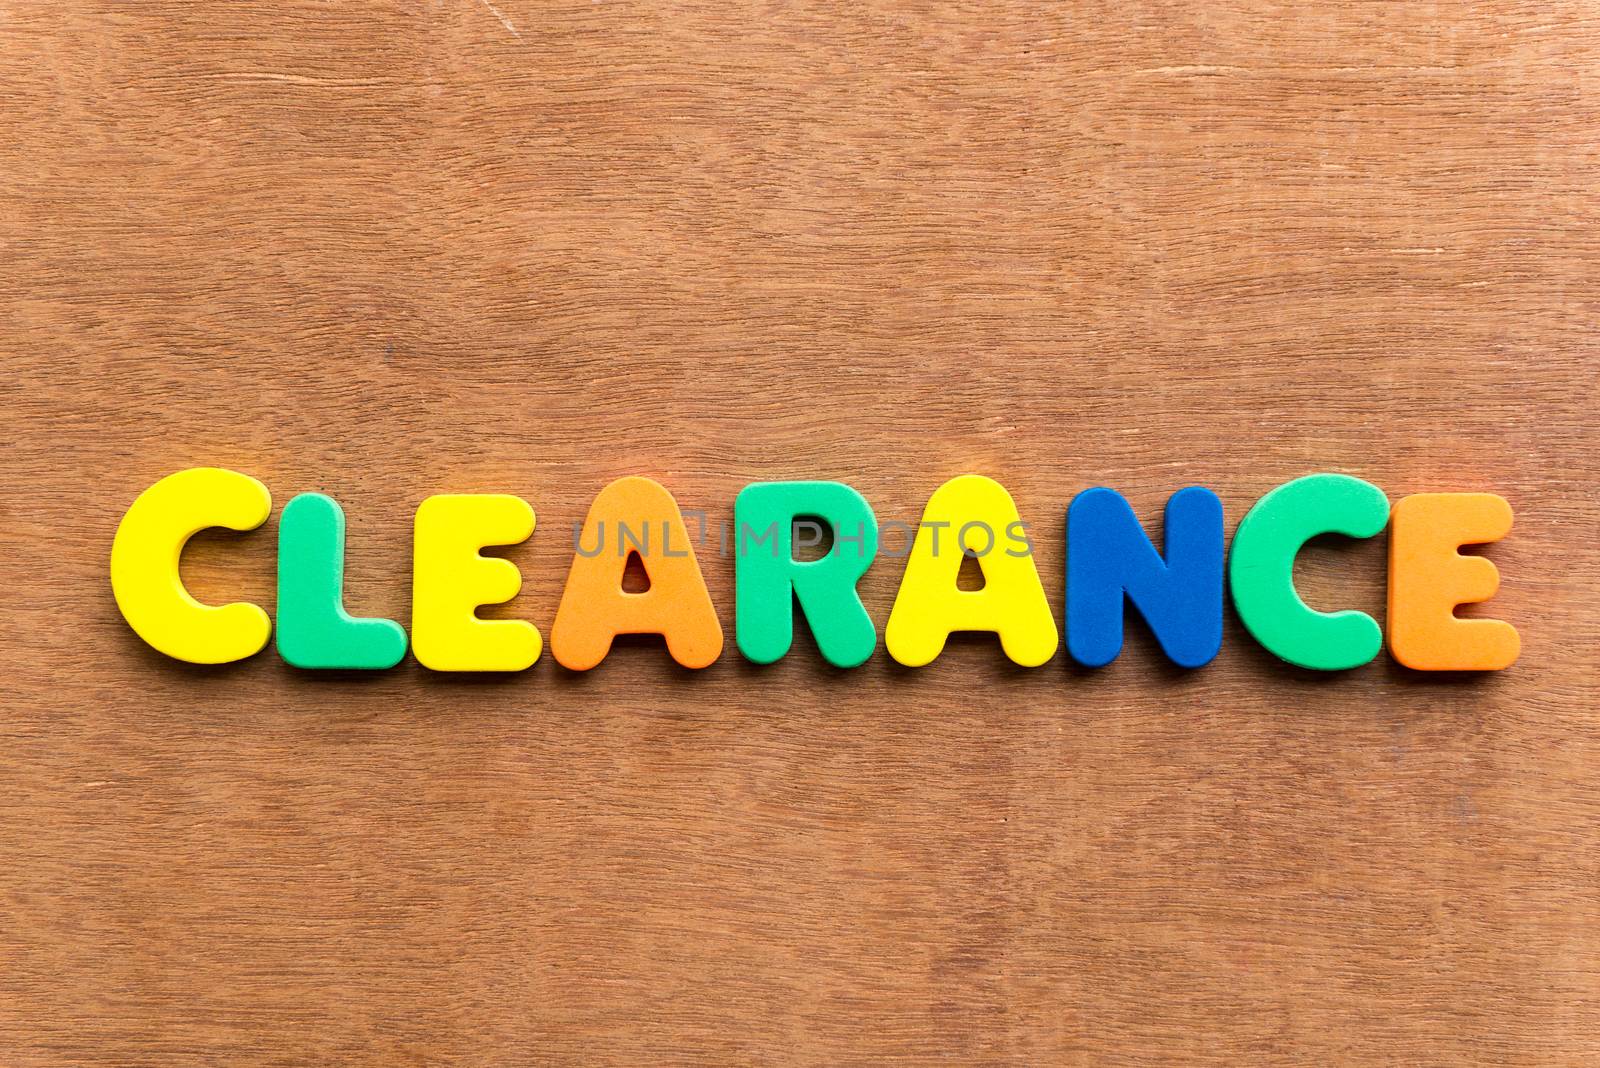 clearance colorful word on the wooden background